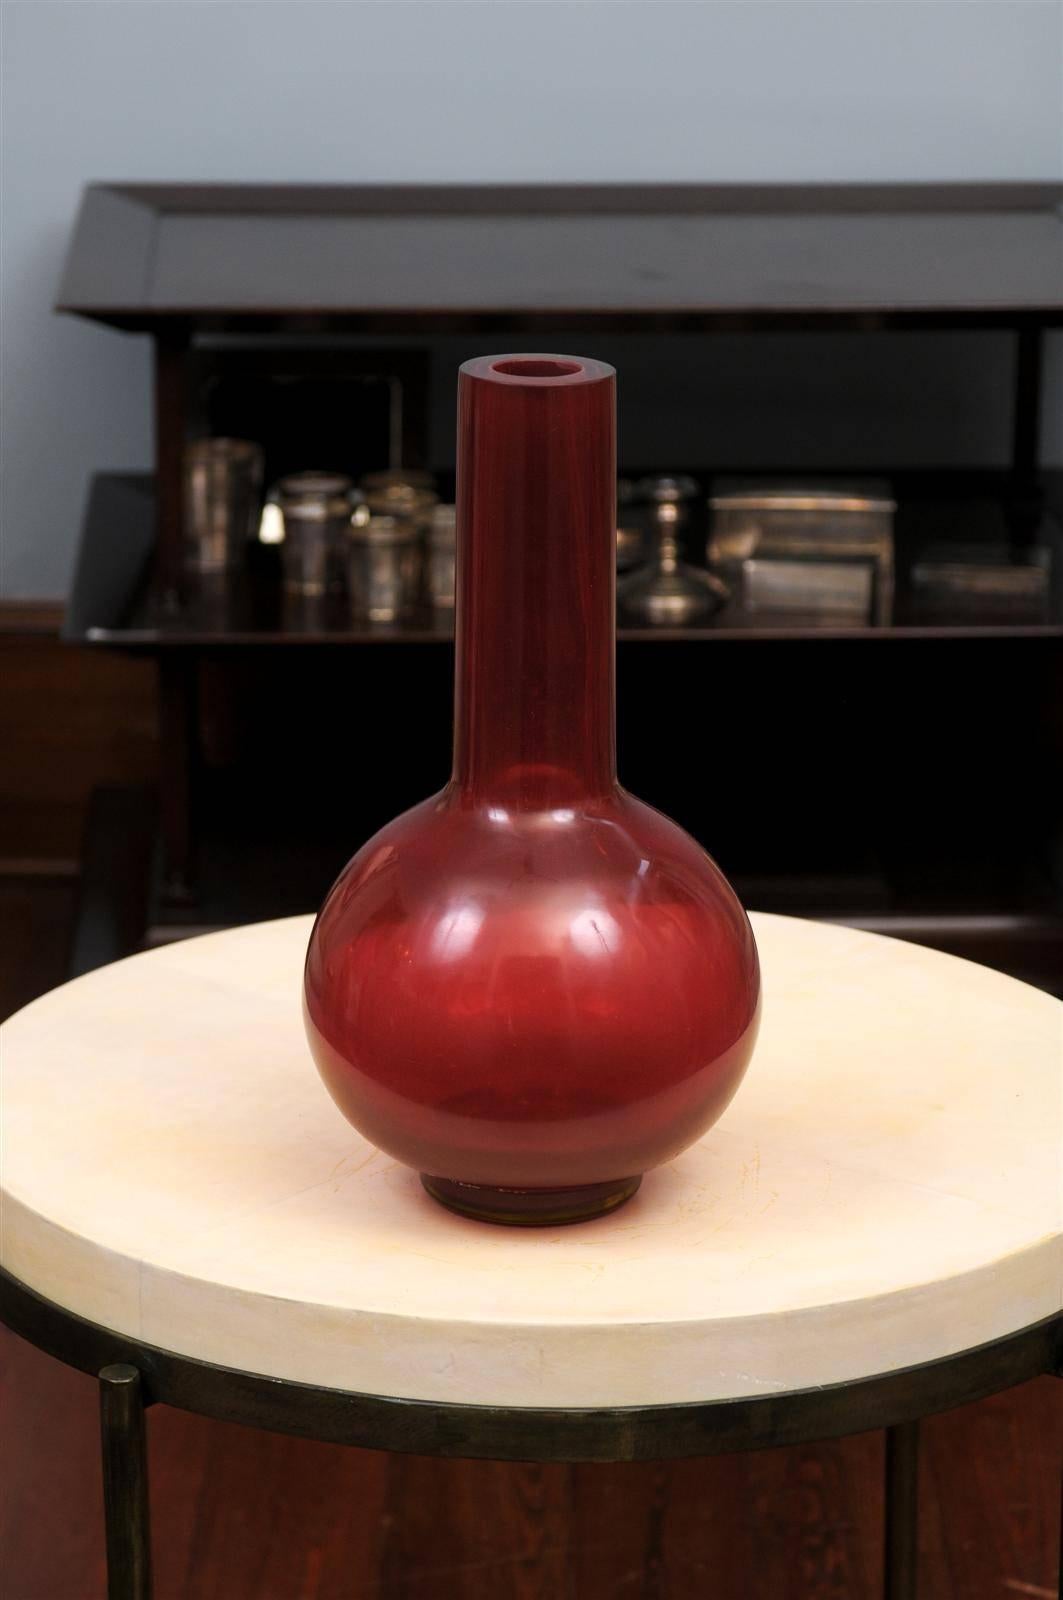 Peking gourd vase, translucent red by Robert Kuo